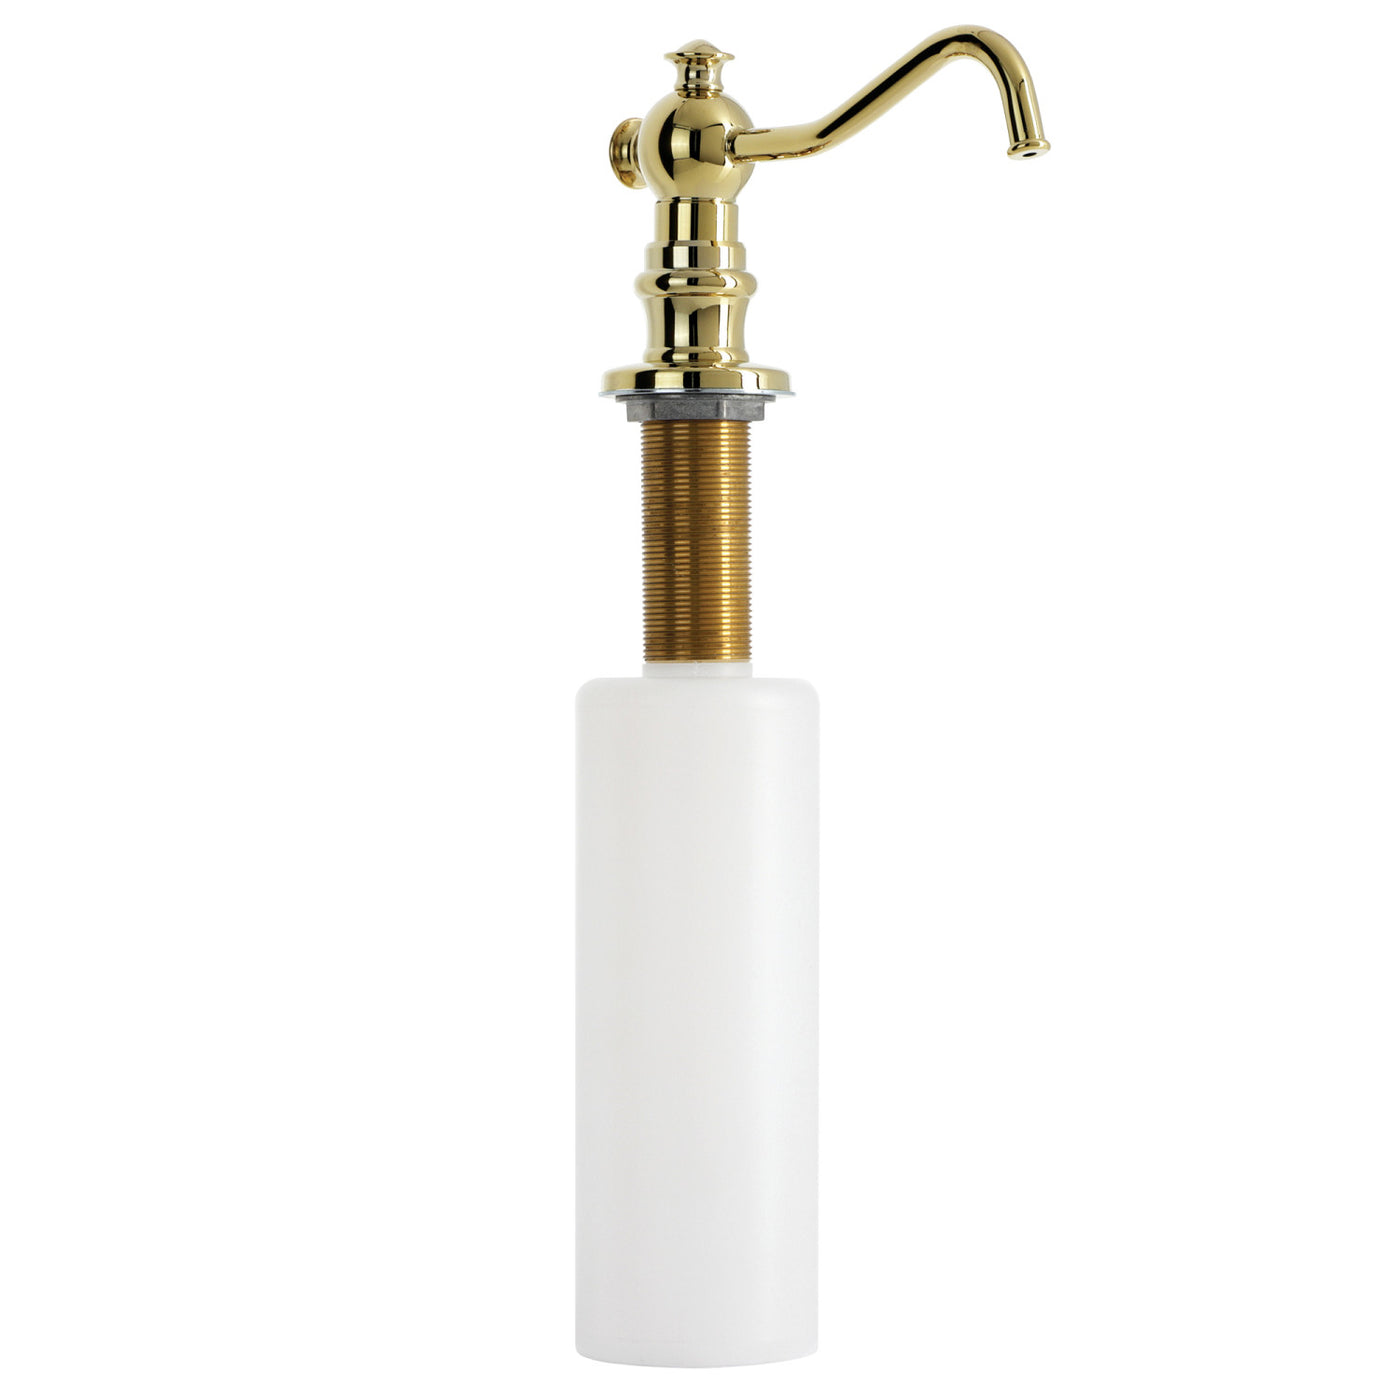 Elements of Design ESD7602 Curved Nozzle Metal Soap Dispenser, Polished Brass